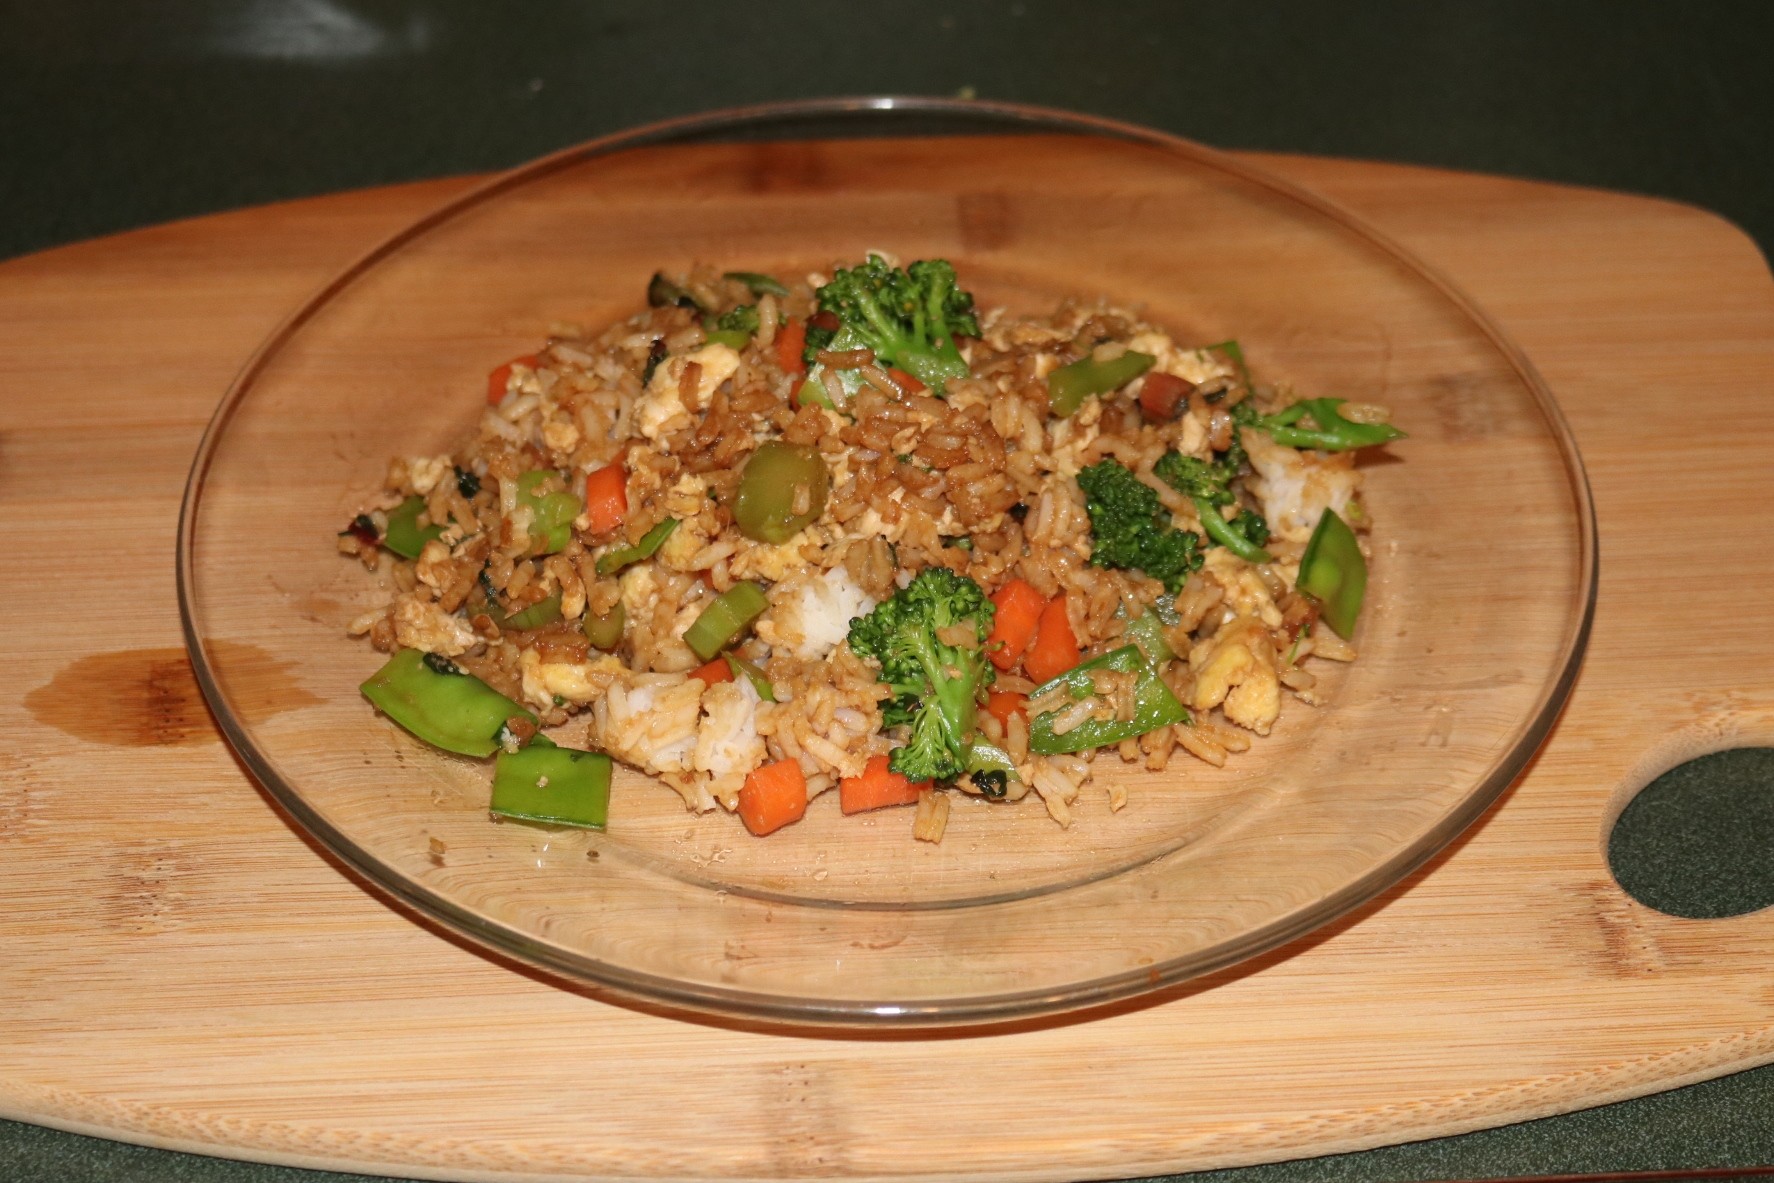 A plate of fried rice on a bamboo cutting board.</p><p>Homegrown vegetables include broccoli, snow peas, swiss chard, asparagus and carrots. Note: the carrots are not shown in first photo because they were pulled up yesterday & already in the fridge. I forgot about them when I took the picture (lol).</p><p>Cooking details: One of my go-to meals that I eat all the time. It's my version of a cross between stir-fry and fried rice. The vegetables are lightly steamed, then cooked along with garlic, ginger, and eggs. Then quickly sautéed over high heat with white rice & soy sauce. Finished with fresh calamondin juice (also grown in my garden) squeezed over the top.